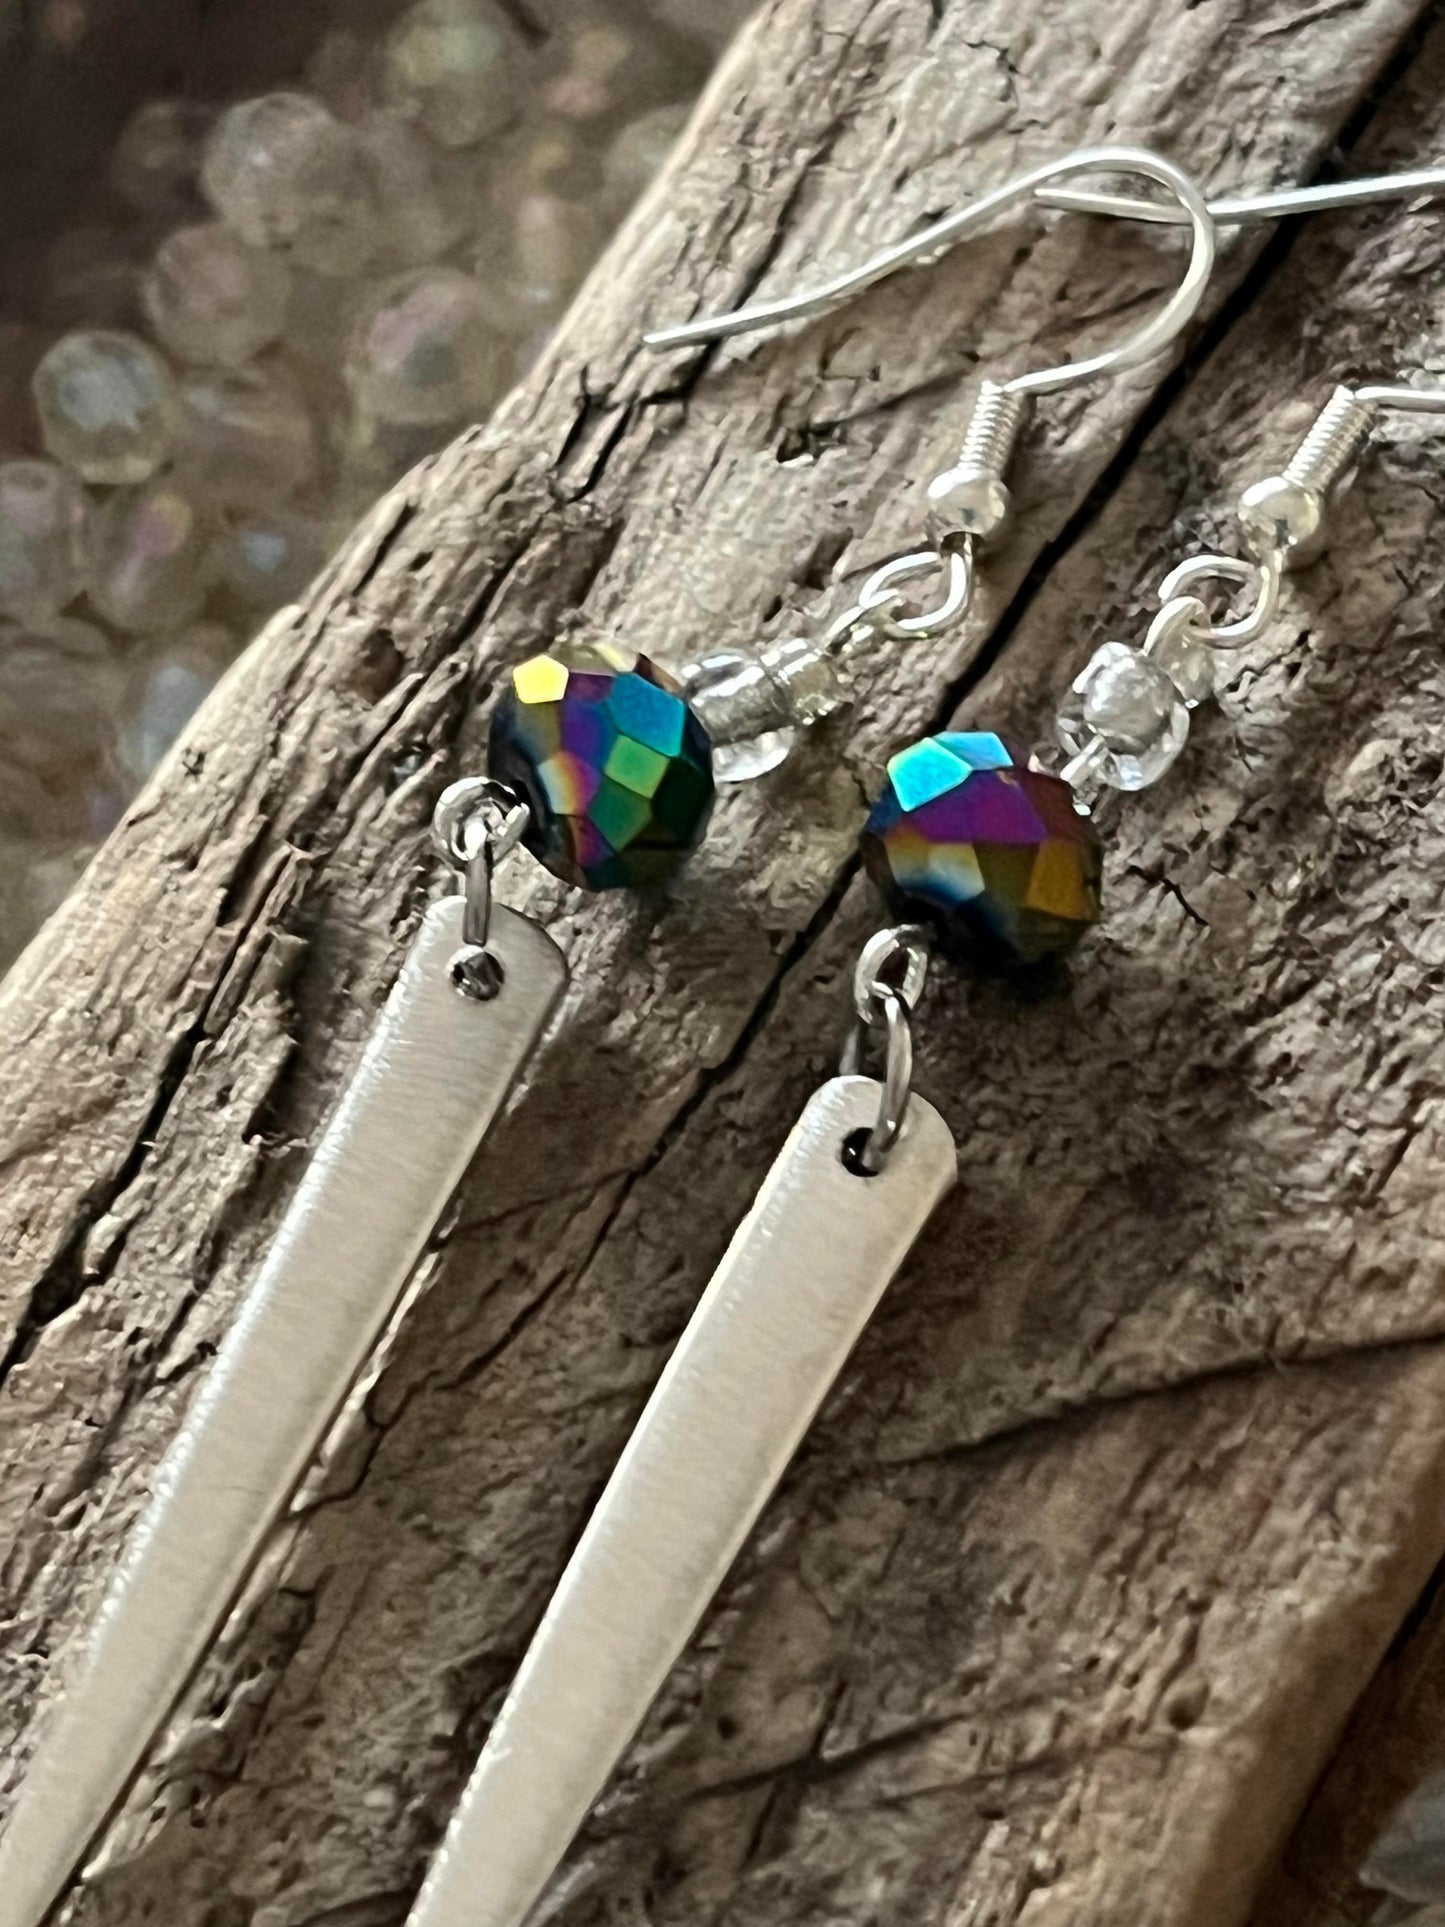 Earrings : Fork tines with beads.